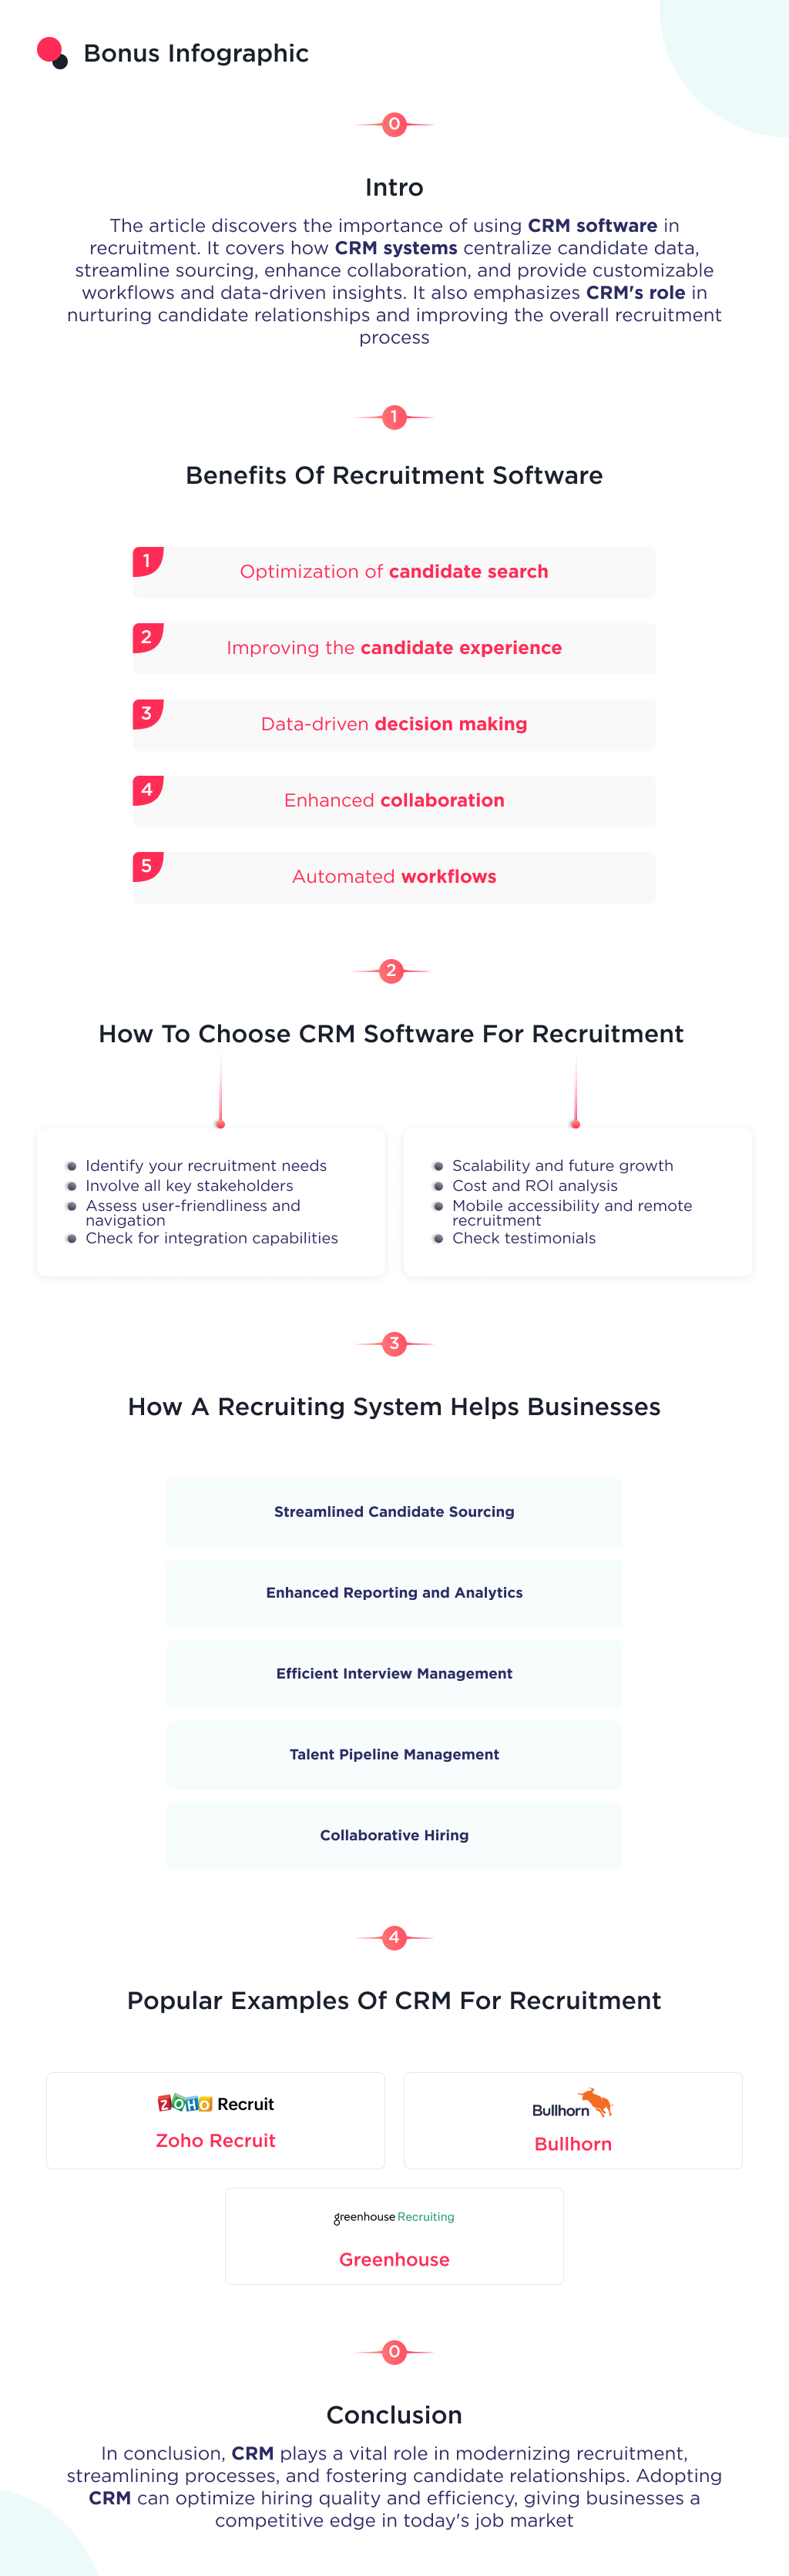 A bonus infographic to the article named "CRM for Recruiting: Why Your Business Needs It"